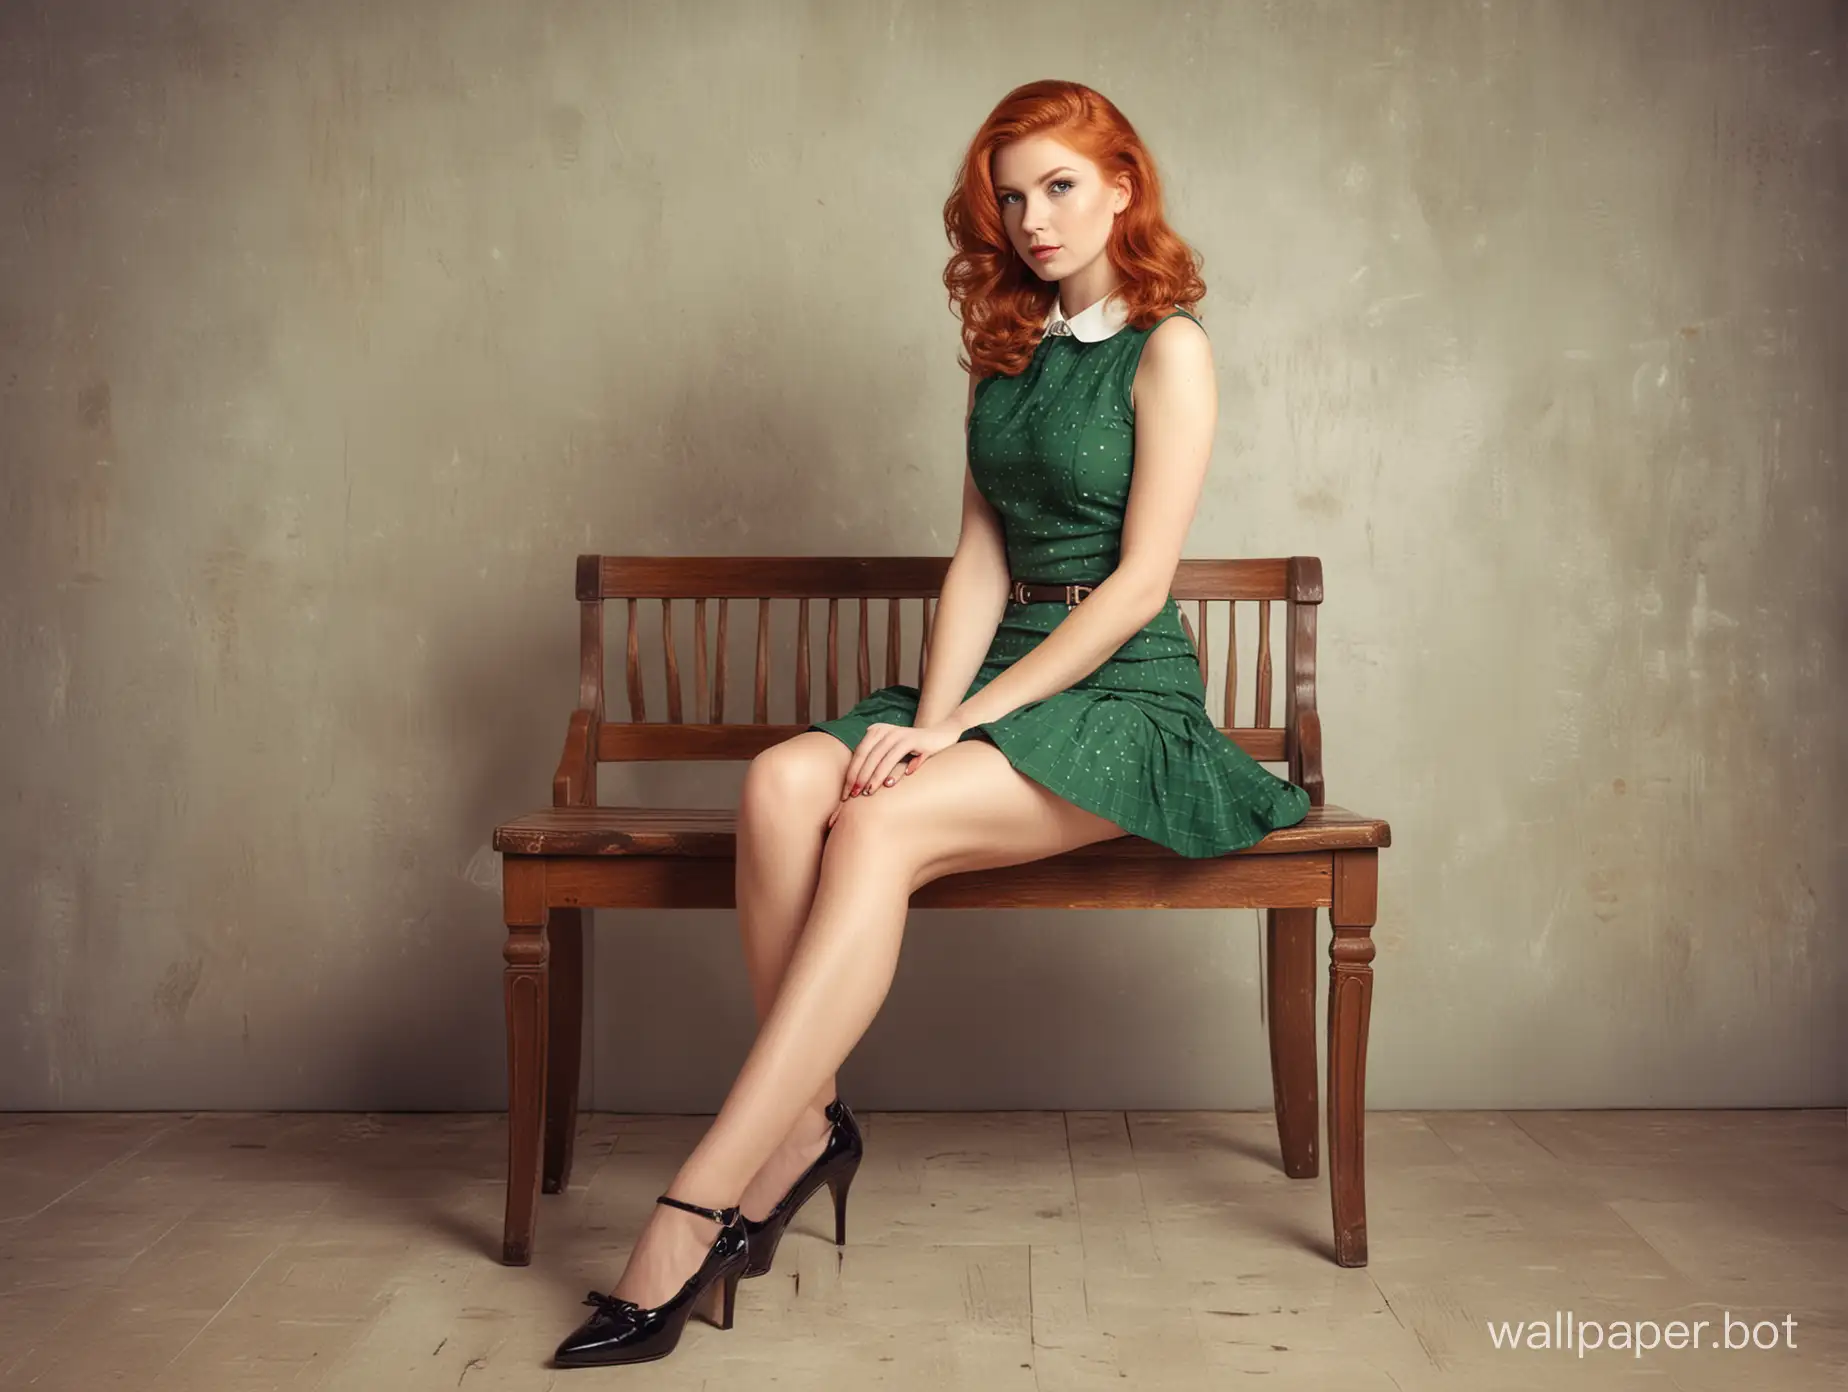 Vintage-Style-Redhead-Woman-Sitting-in-Mini-Skirt-and-High-Heels